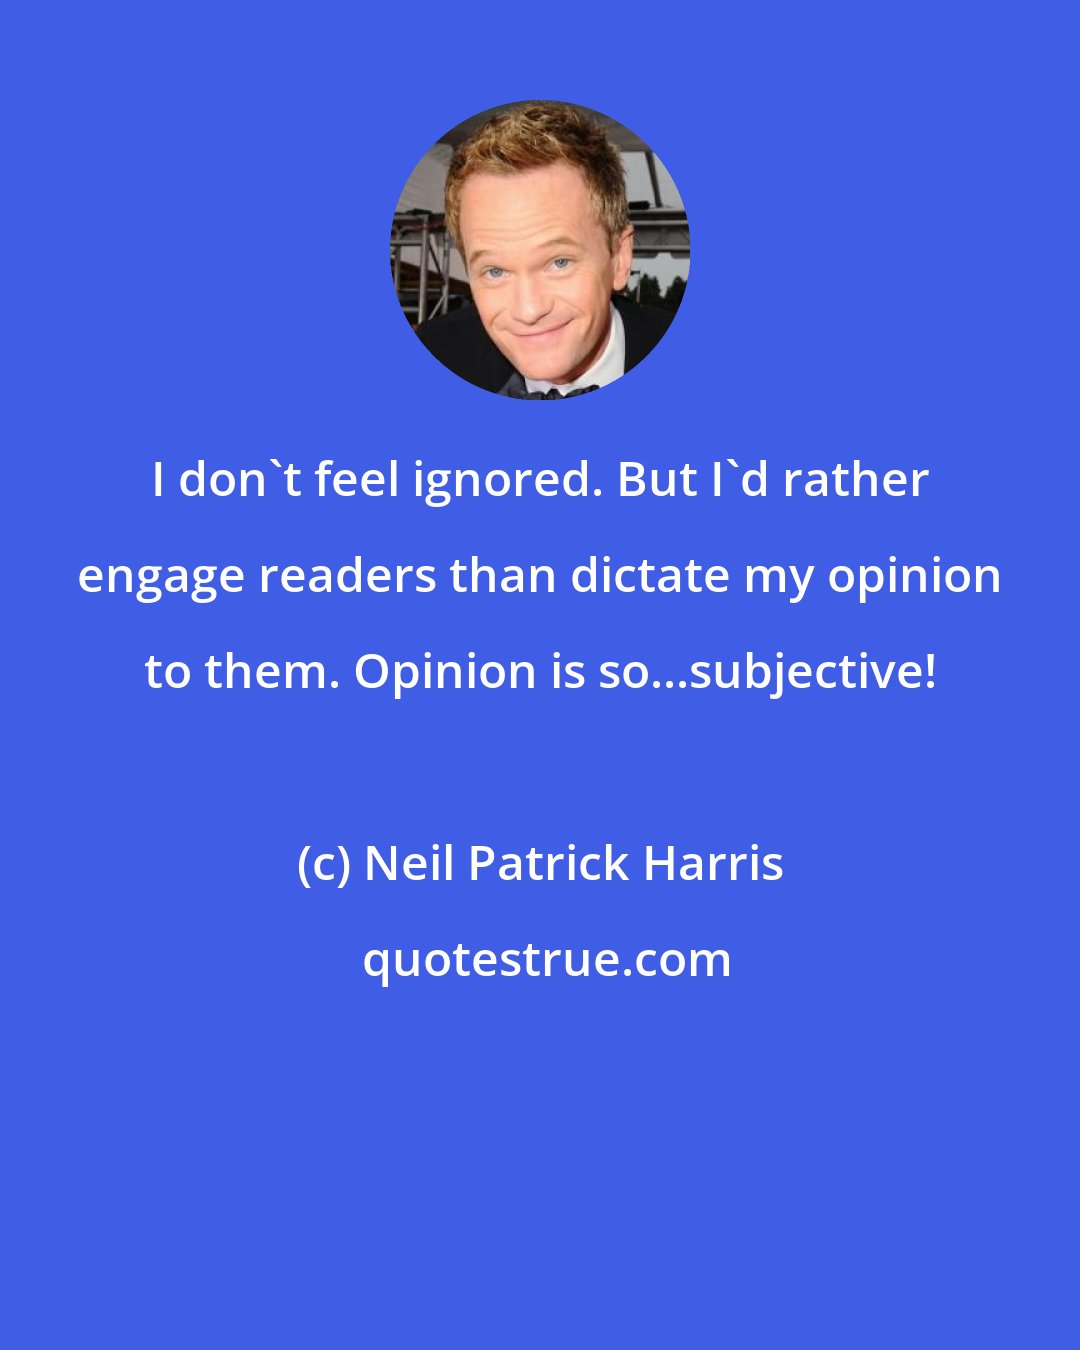 Neil Patrick Harris: I don't feel ignored. But I'd rather engage readers than dictate my opinion to them. Opinion is so...subjective!